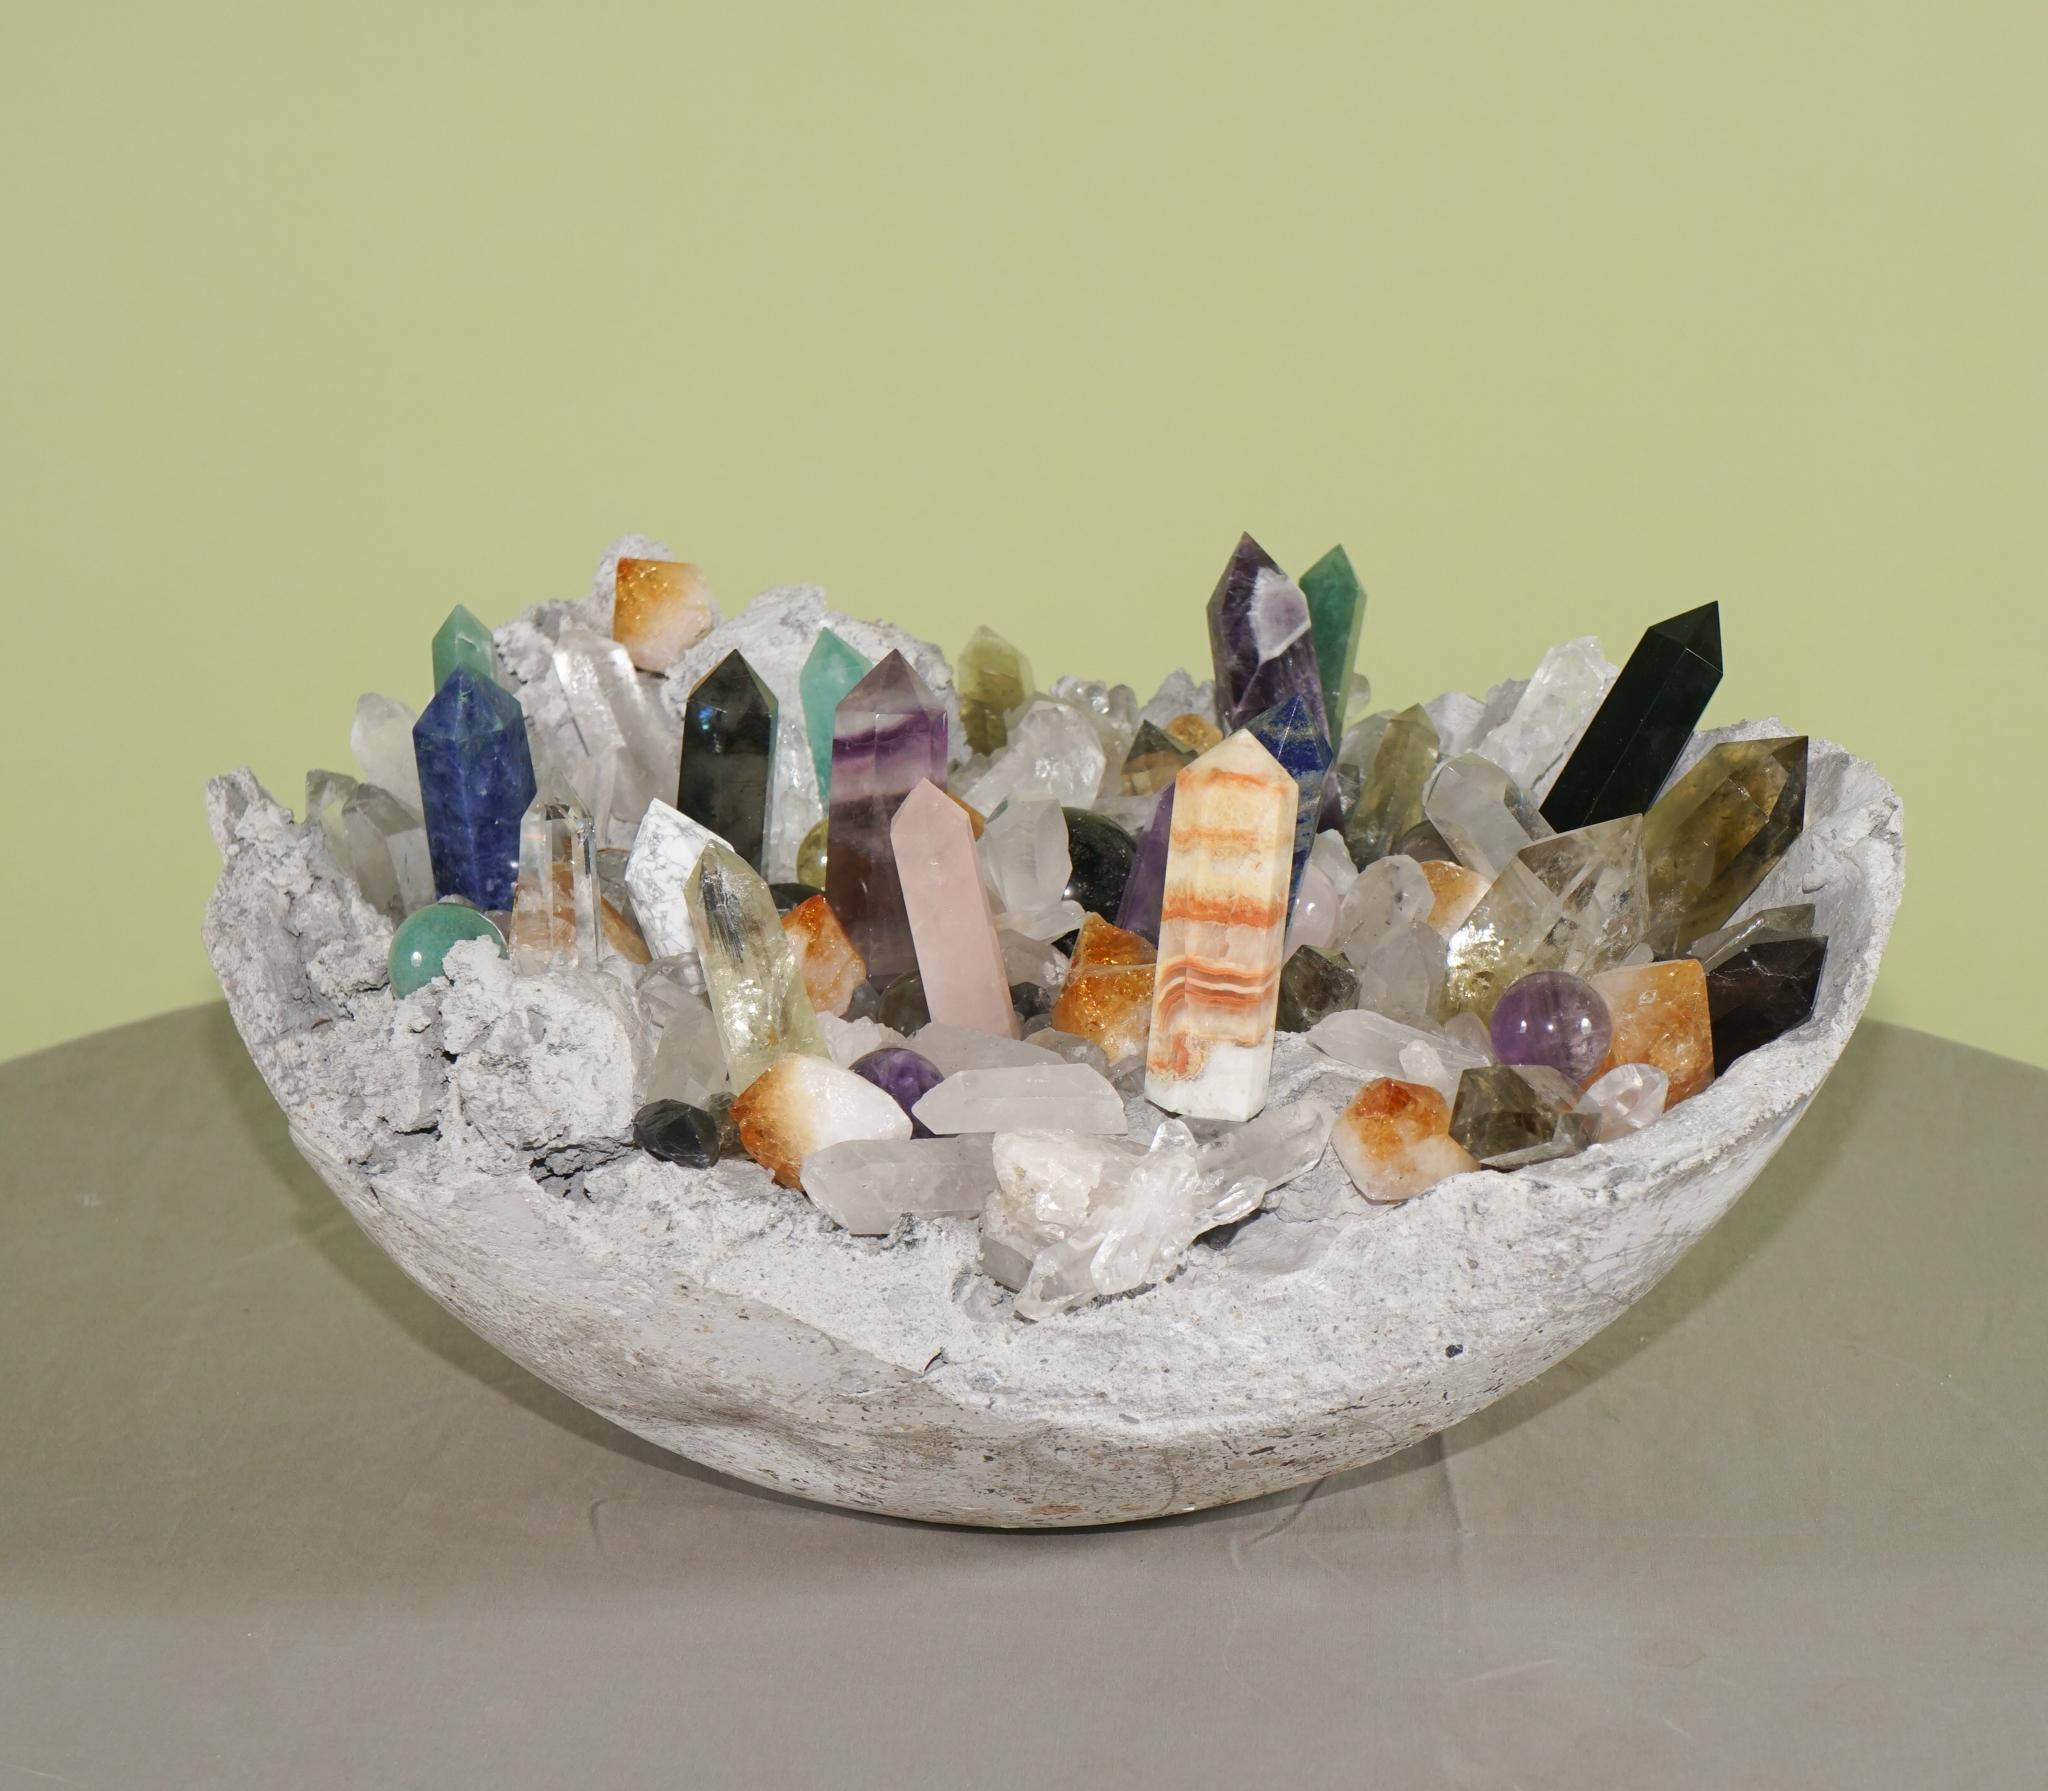 This collection of wands and spheres along with naturally formed crystals are all displayed in a custom-made concrete geode bowl. The stones are of many different varieties such as fluorite, amethyst, citrine, rose quartz, garnet, obsidian,